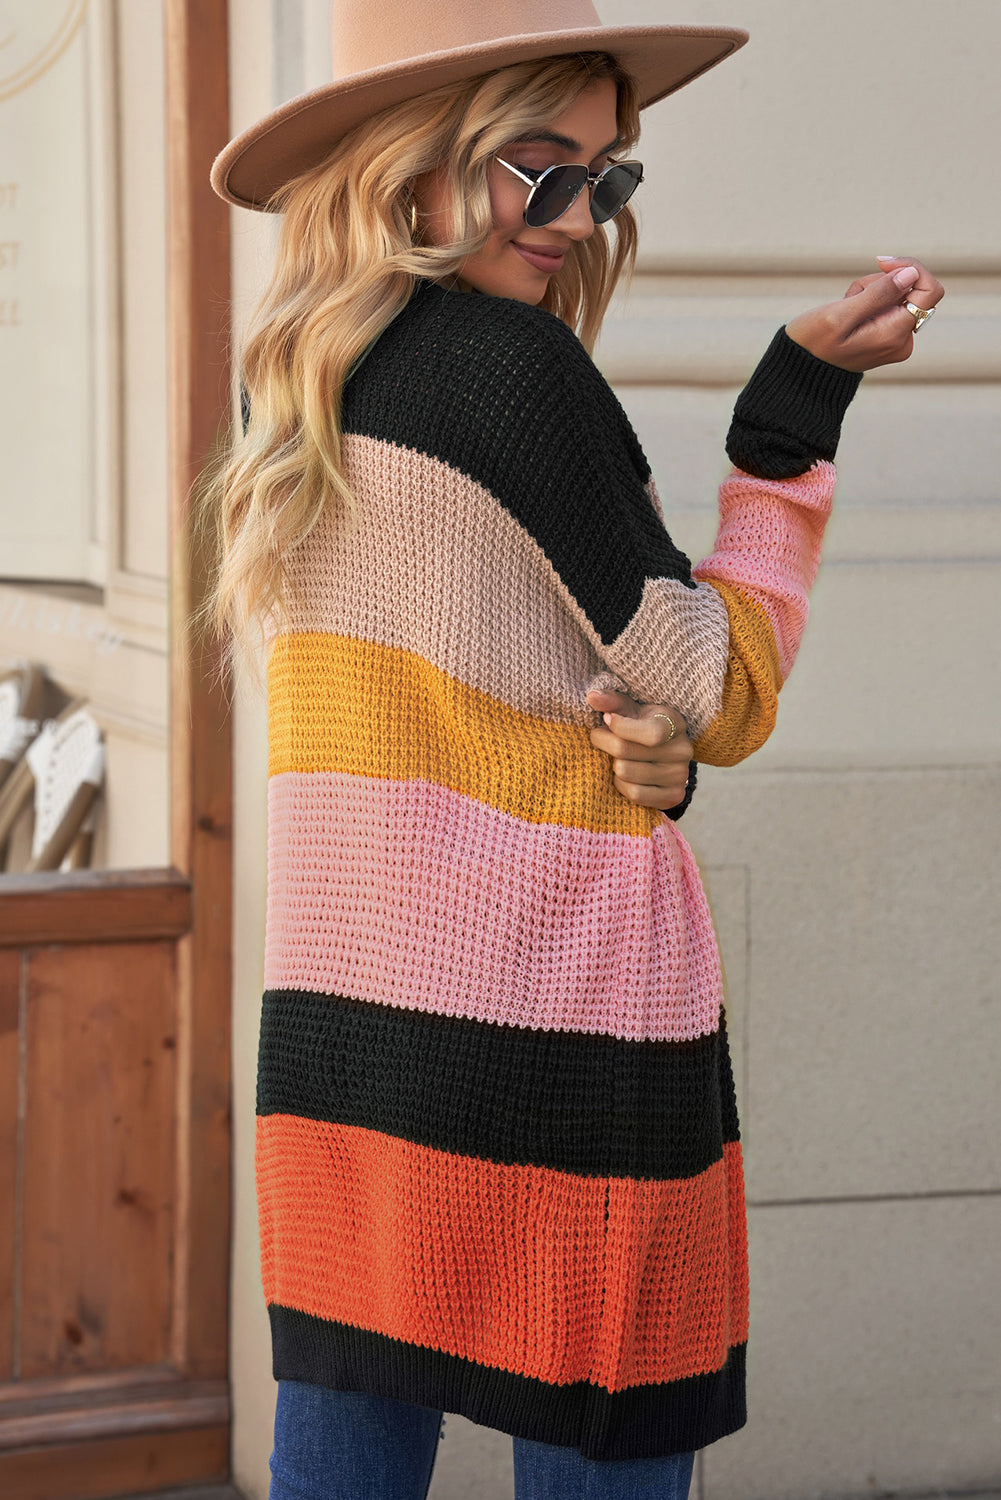 White Label Striped Waffle Knit Open Front Multicolored Lightweight Comfy Cardigan Orange, Black, Yellow, Tan, Pink Multicolor